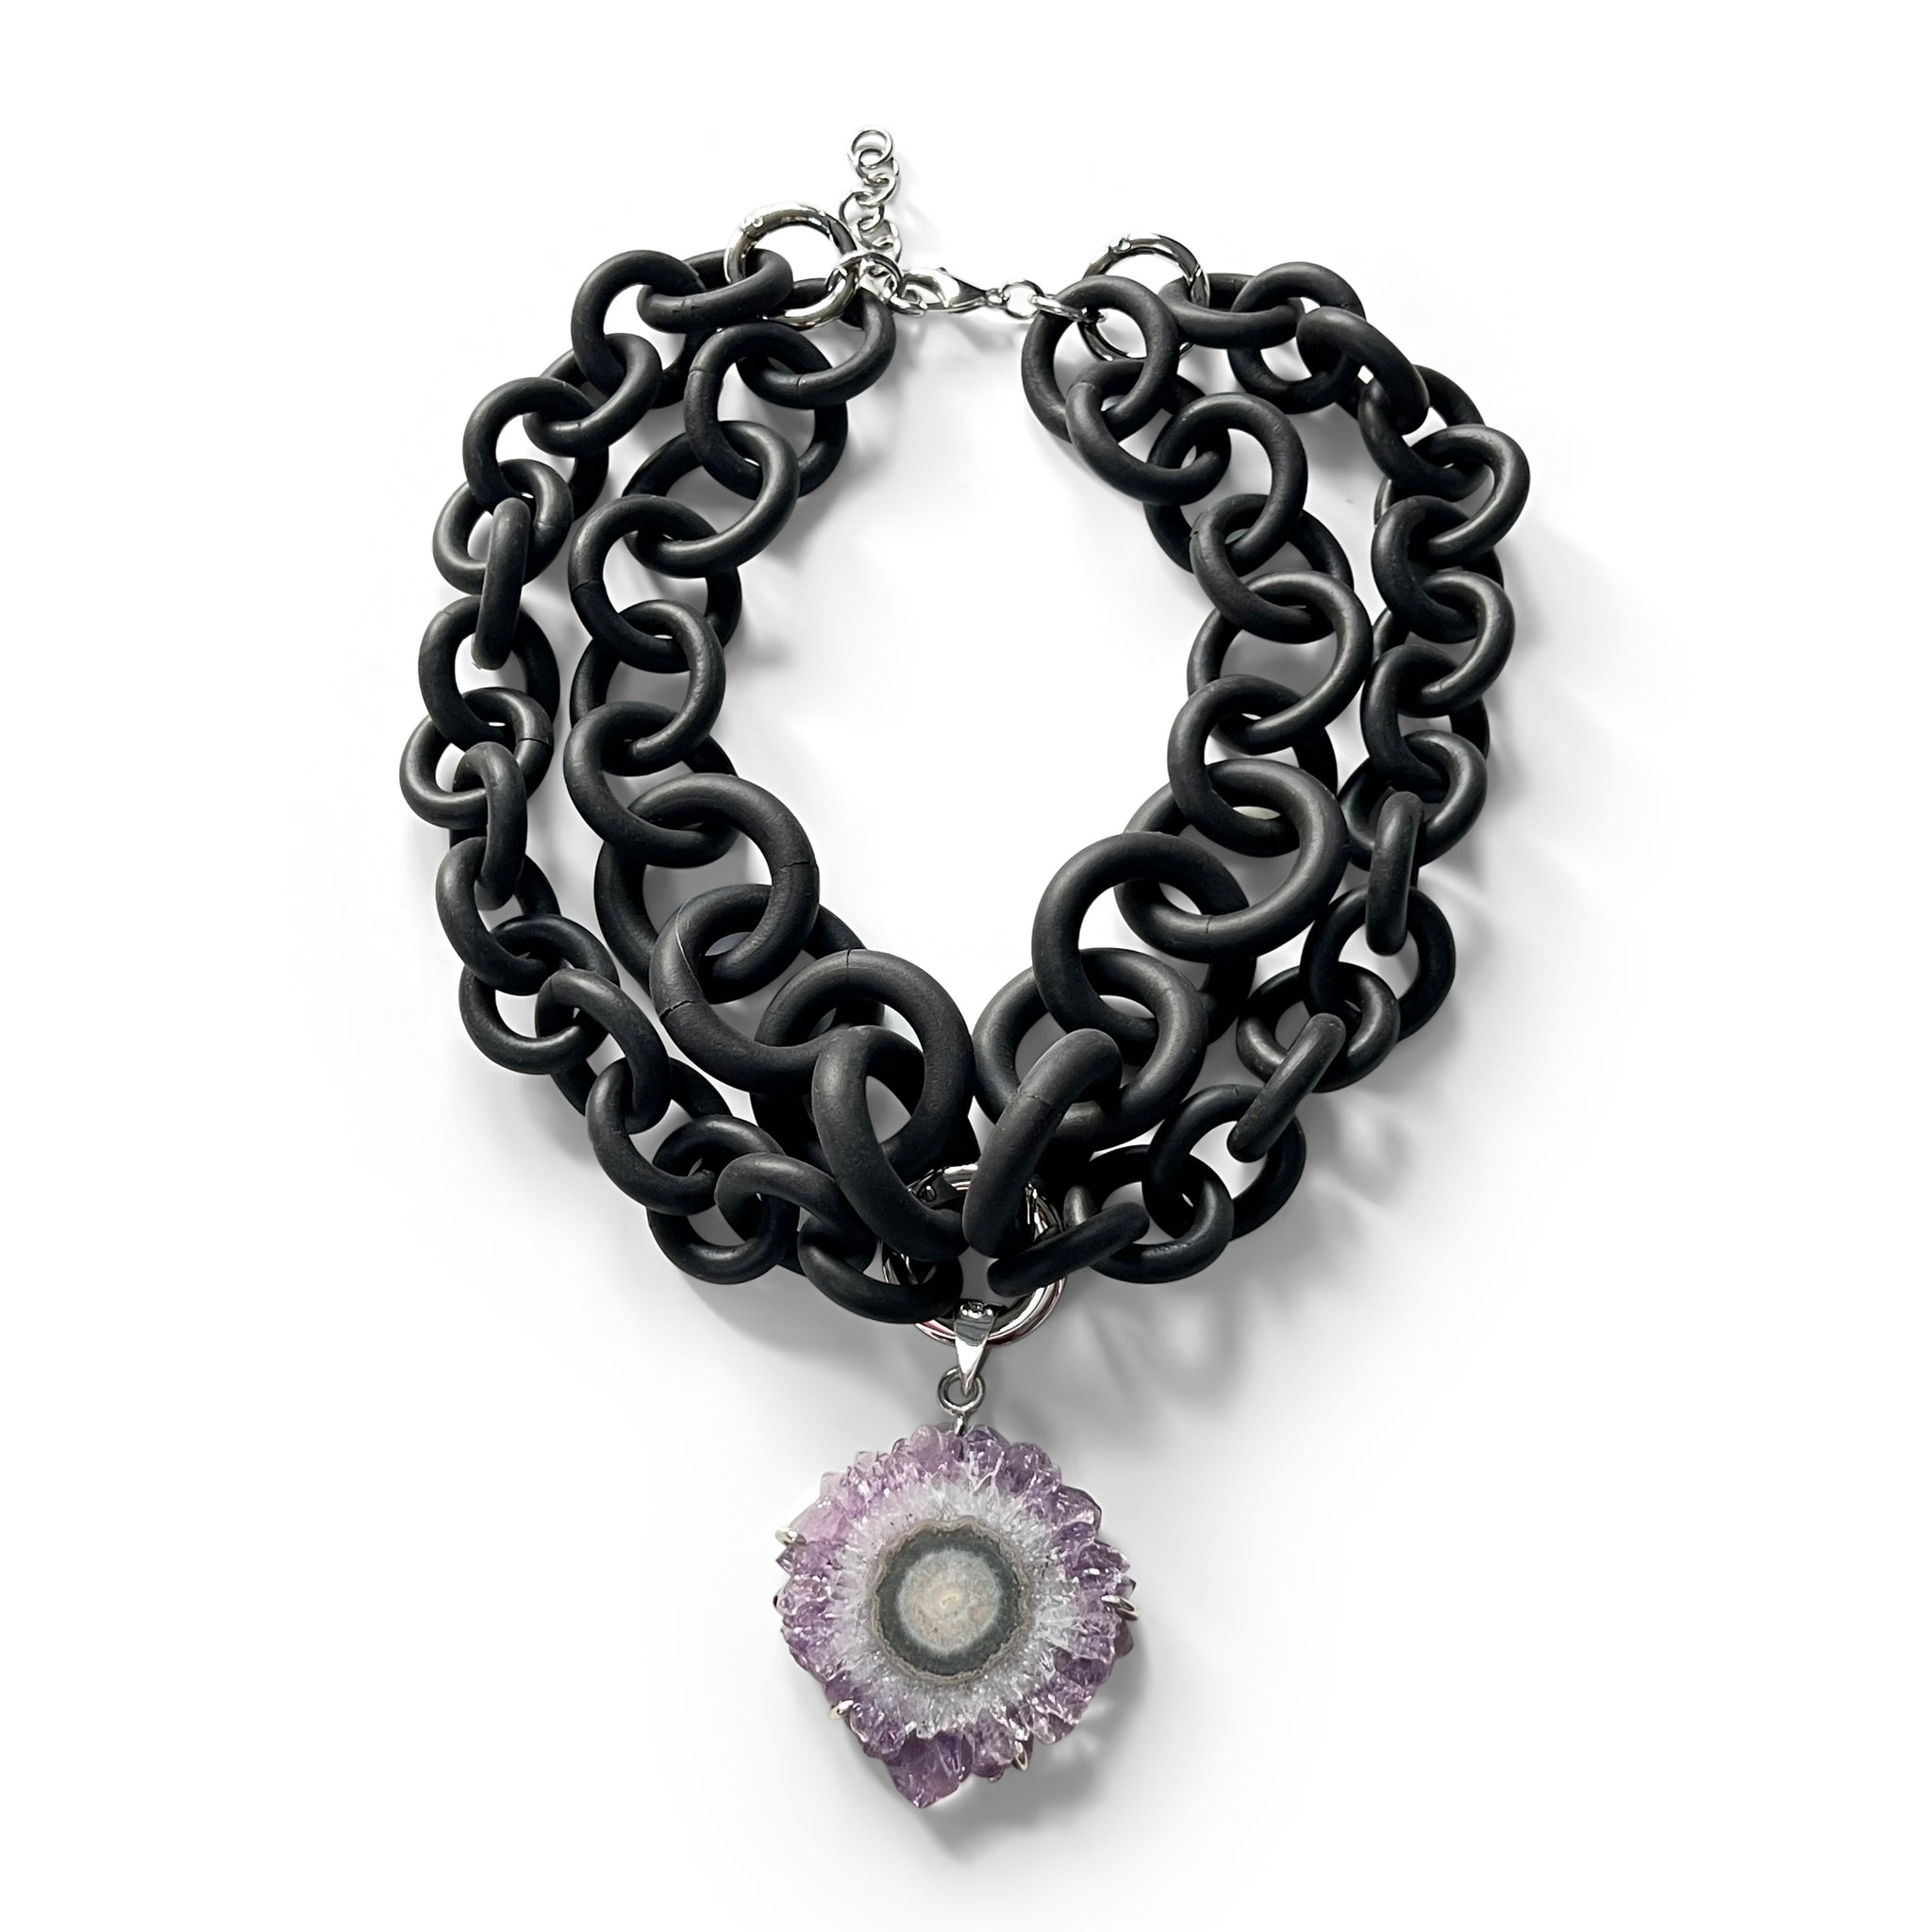 2-STRAND BLACK RUBBER NECKLACE WITH AN AMETHYST STALACTITE WRAPPED IN SILVER. by NYET JEWELRY.